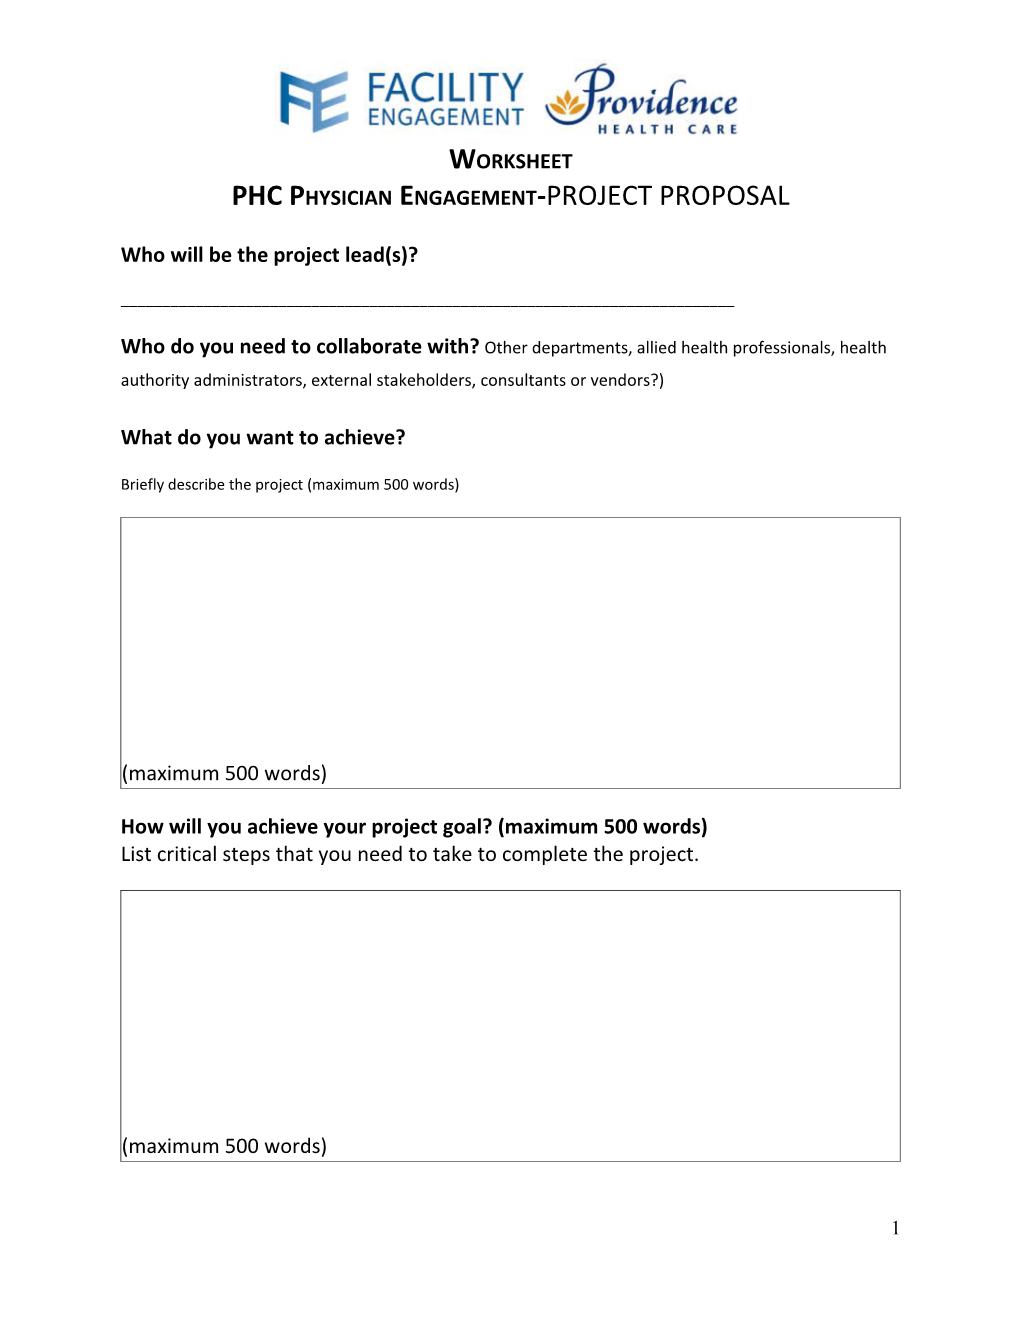 PHC Physician Engagement- PROJECT PROPOSAL